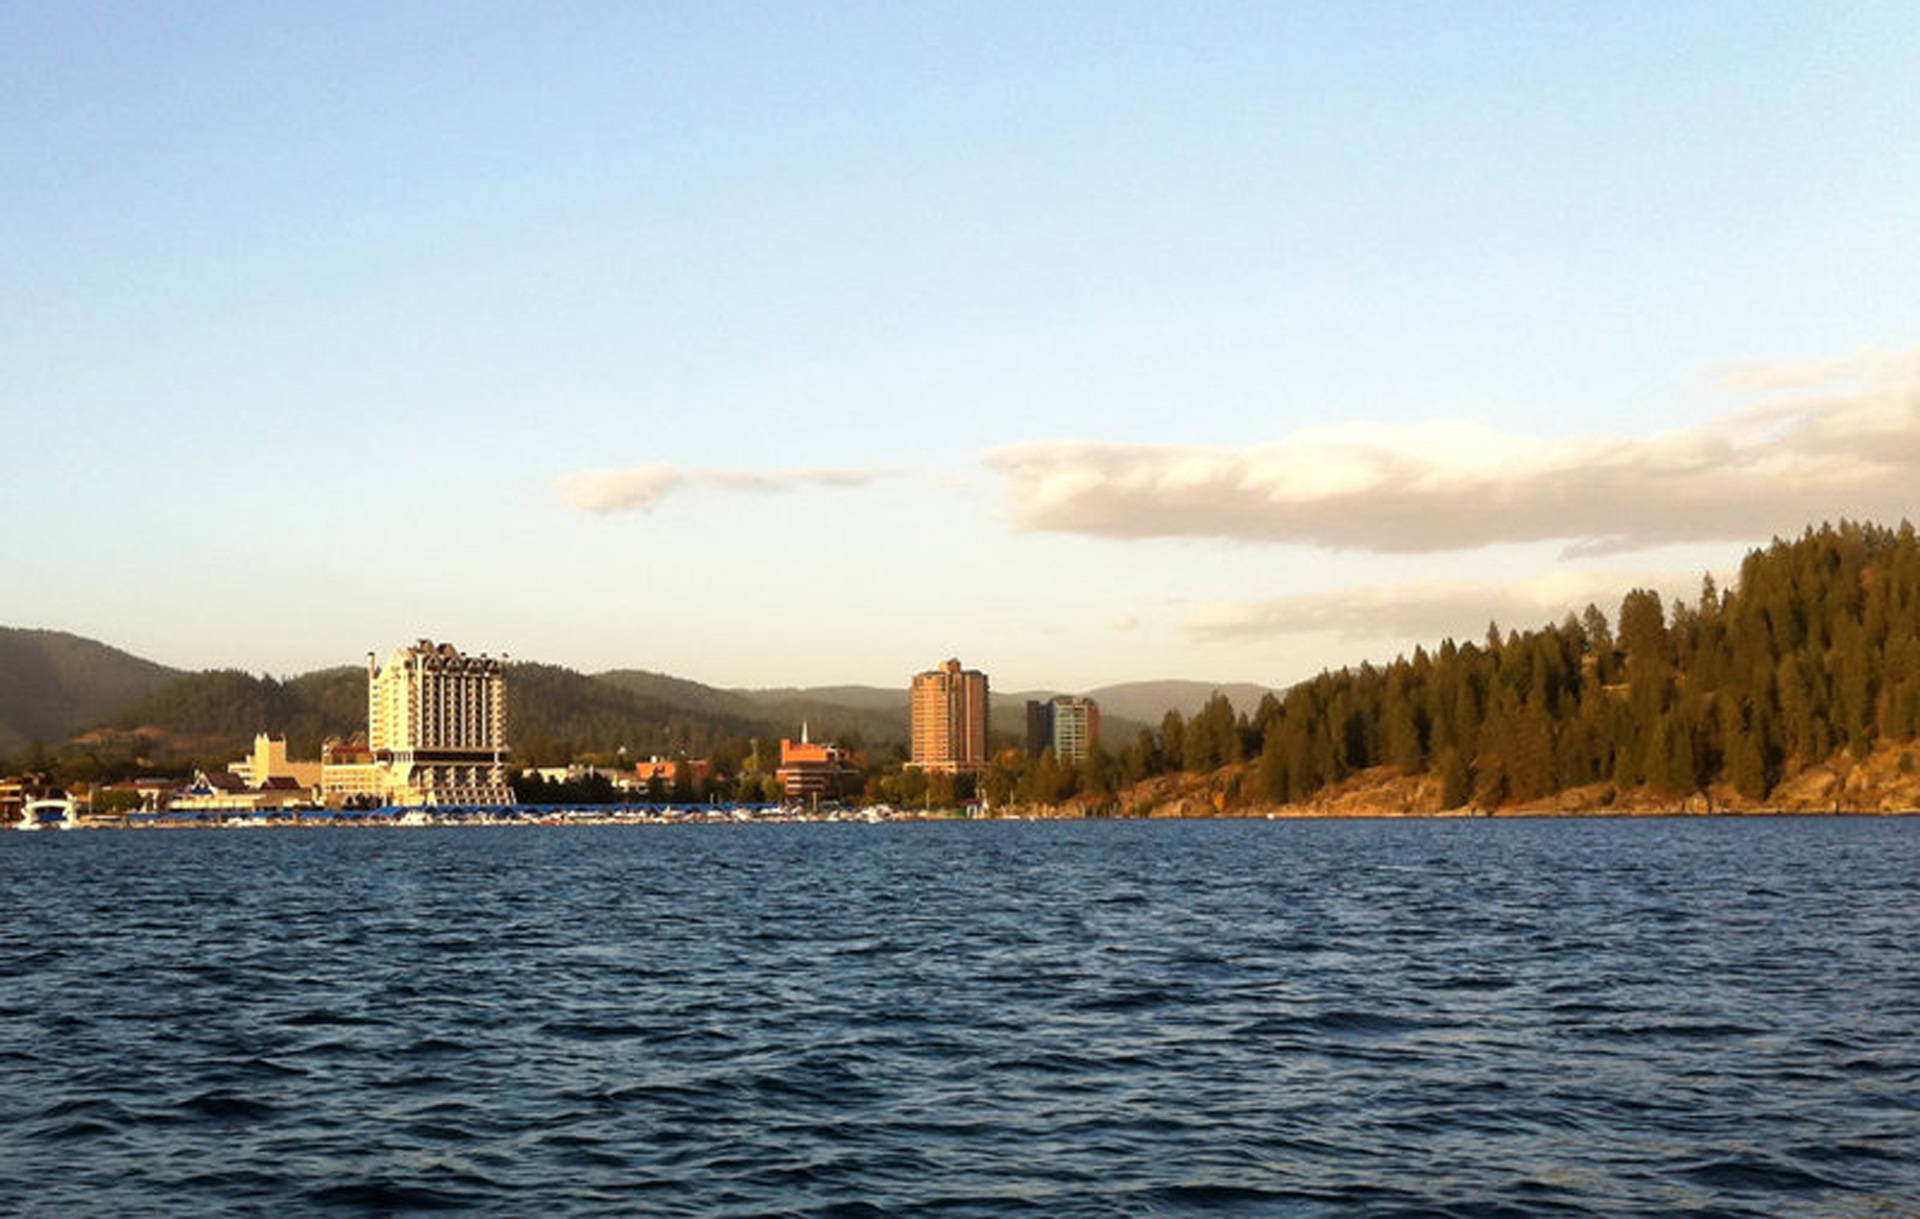 Coeur d'Alene is the largest city and county seat of Kootenai County, Idaho. North Idaho counties like Kootenai have seen their population double since the 1990s. Karen Ybanez/Flickr